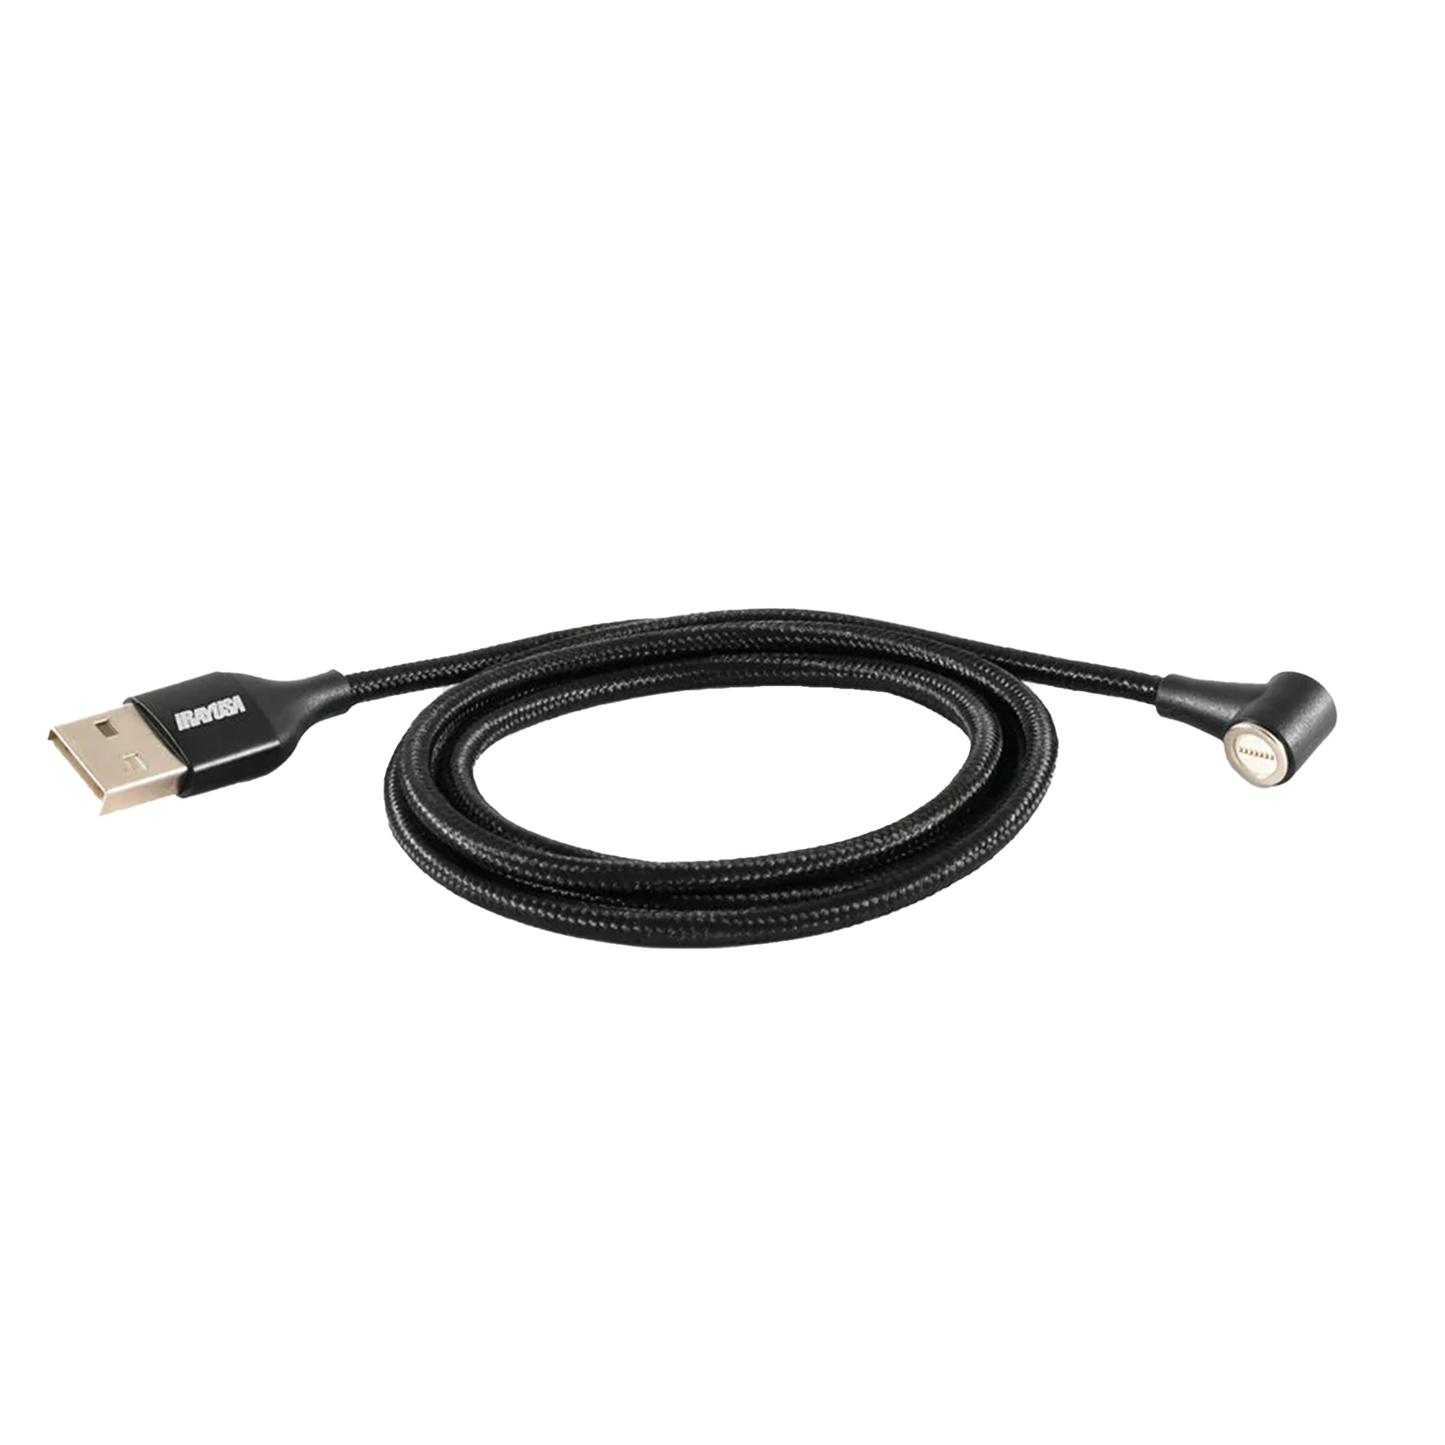 INFIRAY OUTDOOR AC04 USA Magnetic USB Cable for Alpha/Bravo Scopes